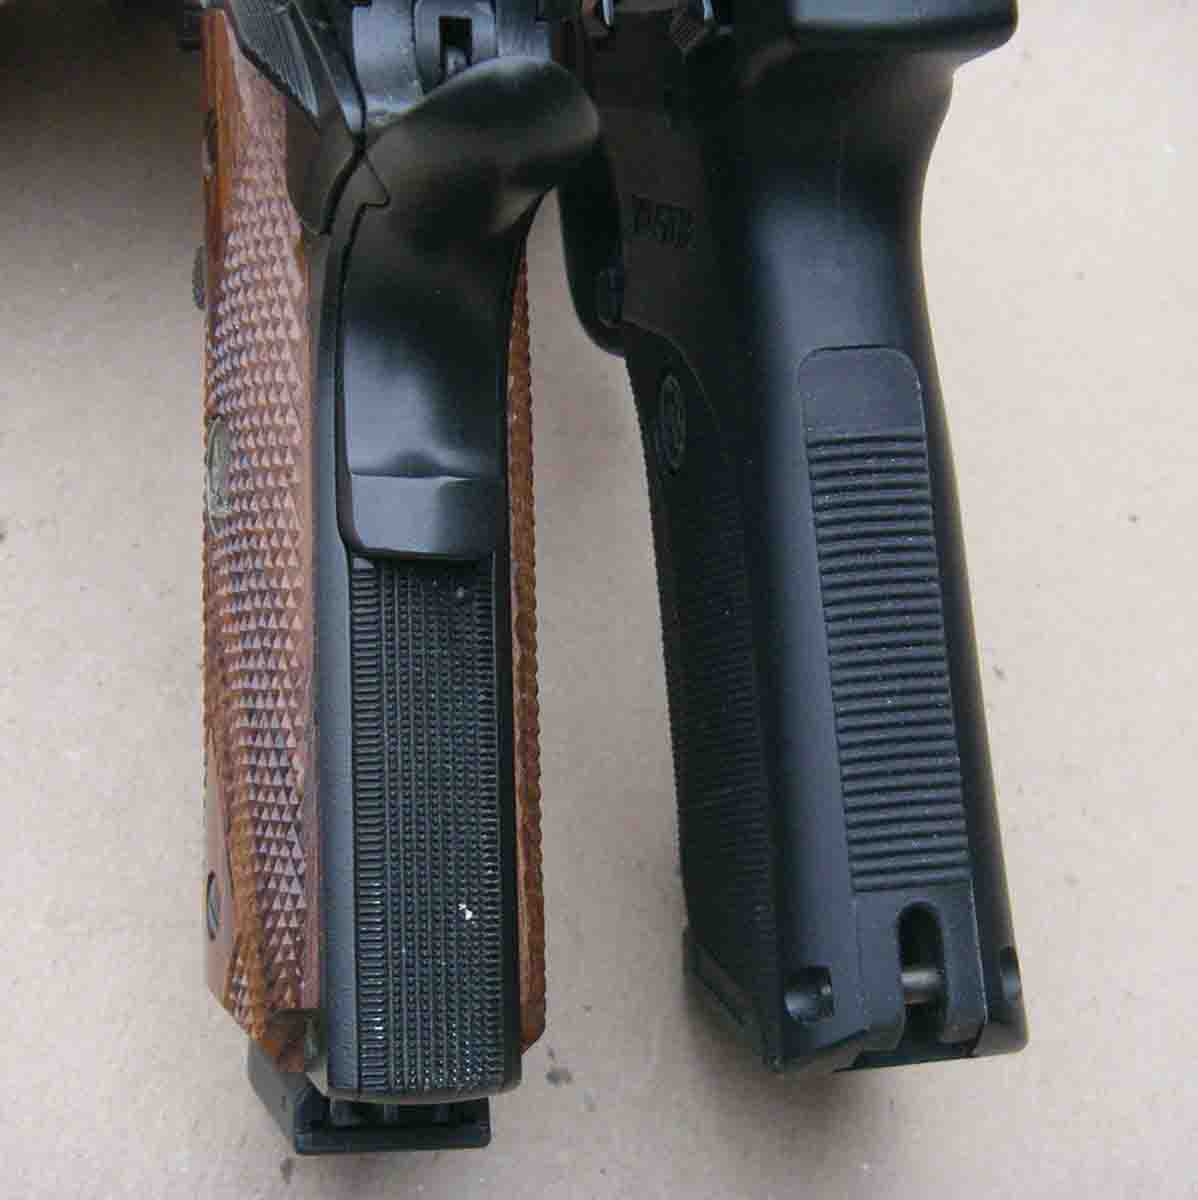 The Ruger SR40 (right) features an unusually thin grip when compared with other high-capacity pistols. For comparison, it is shown next to a Wilson Combat Model 1911.